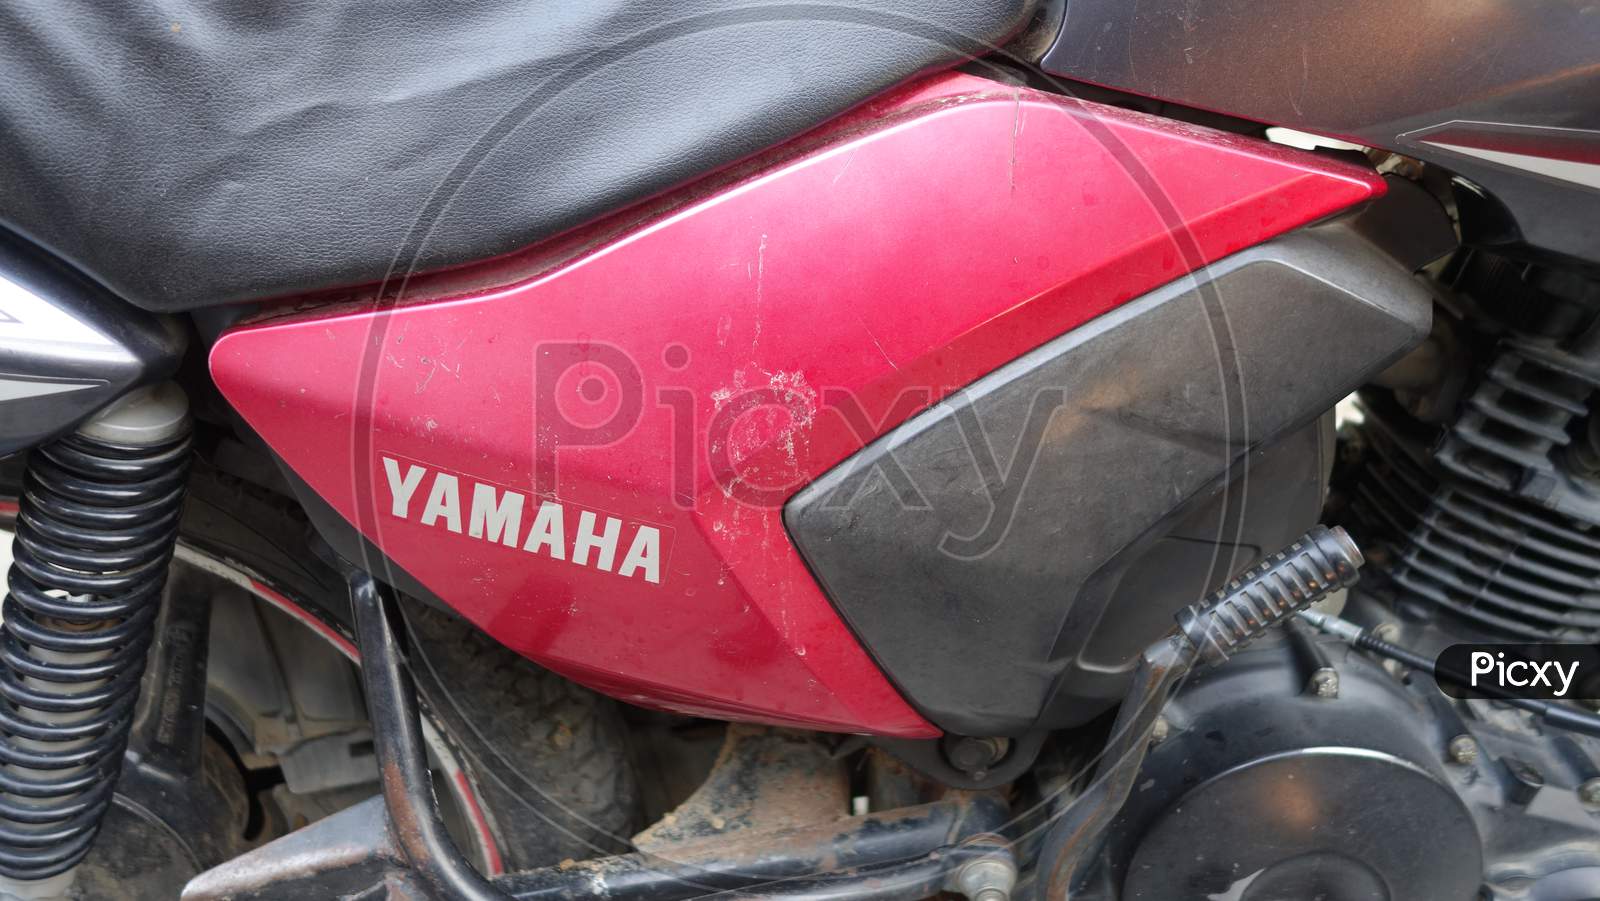 Motorcycle Spare Parts, Side Panel , Fuel Tank. Side Panel Of Yamaha Motorcycle.